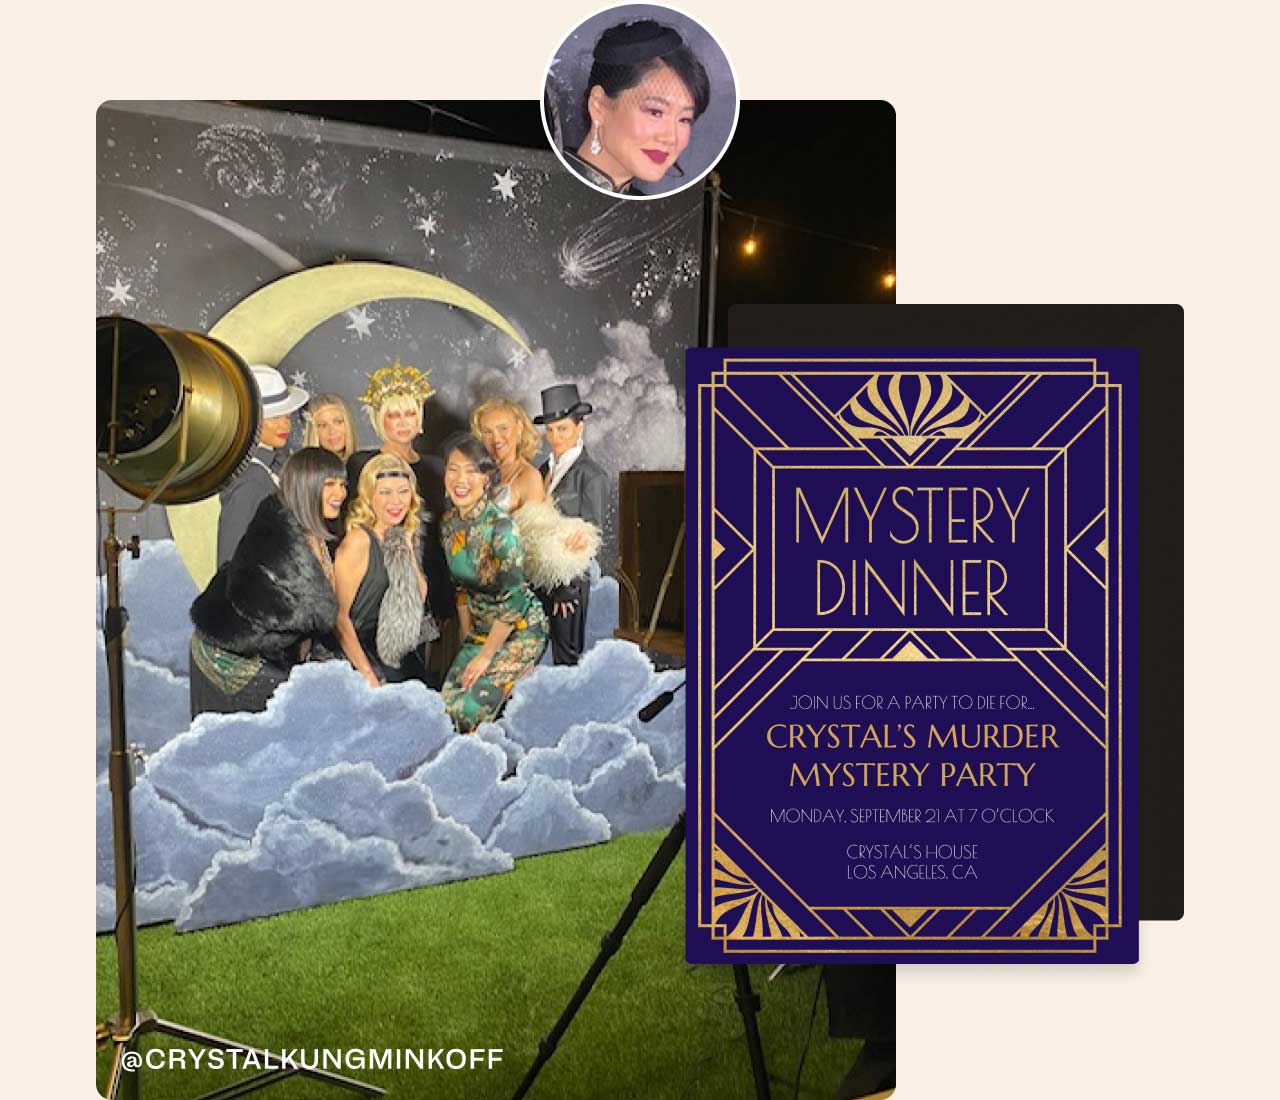 Murder mystery party picture and invitation | @crystalkungminkoff